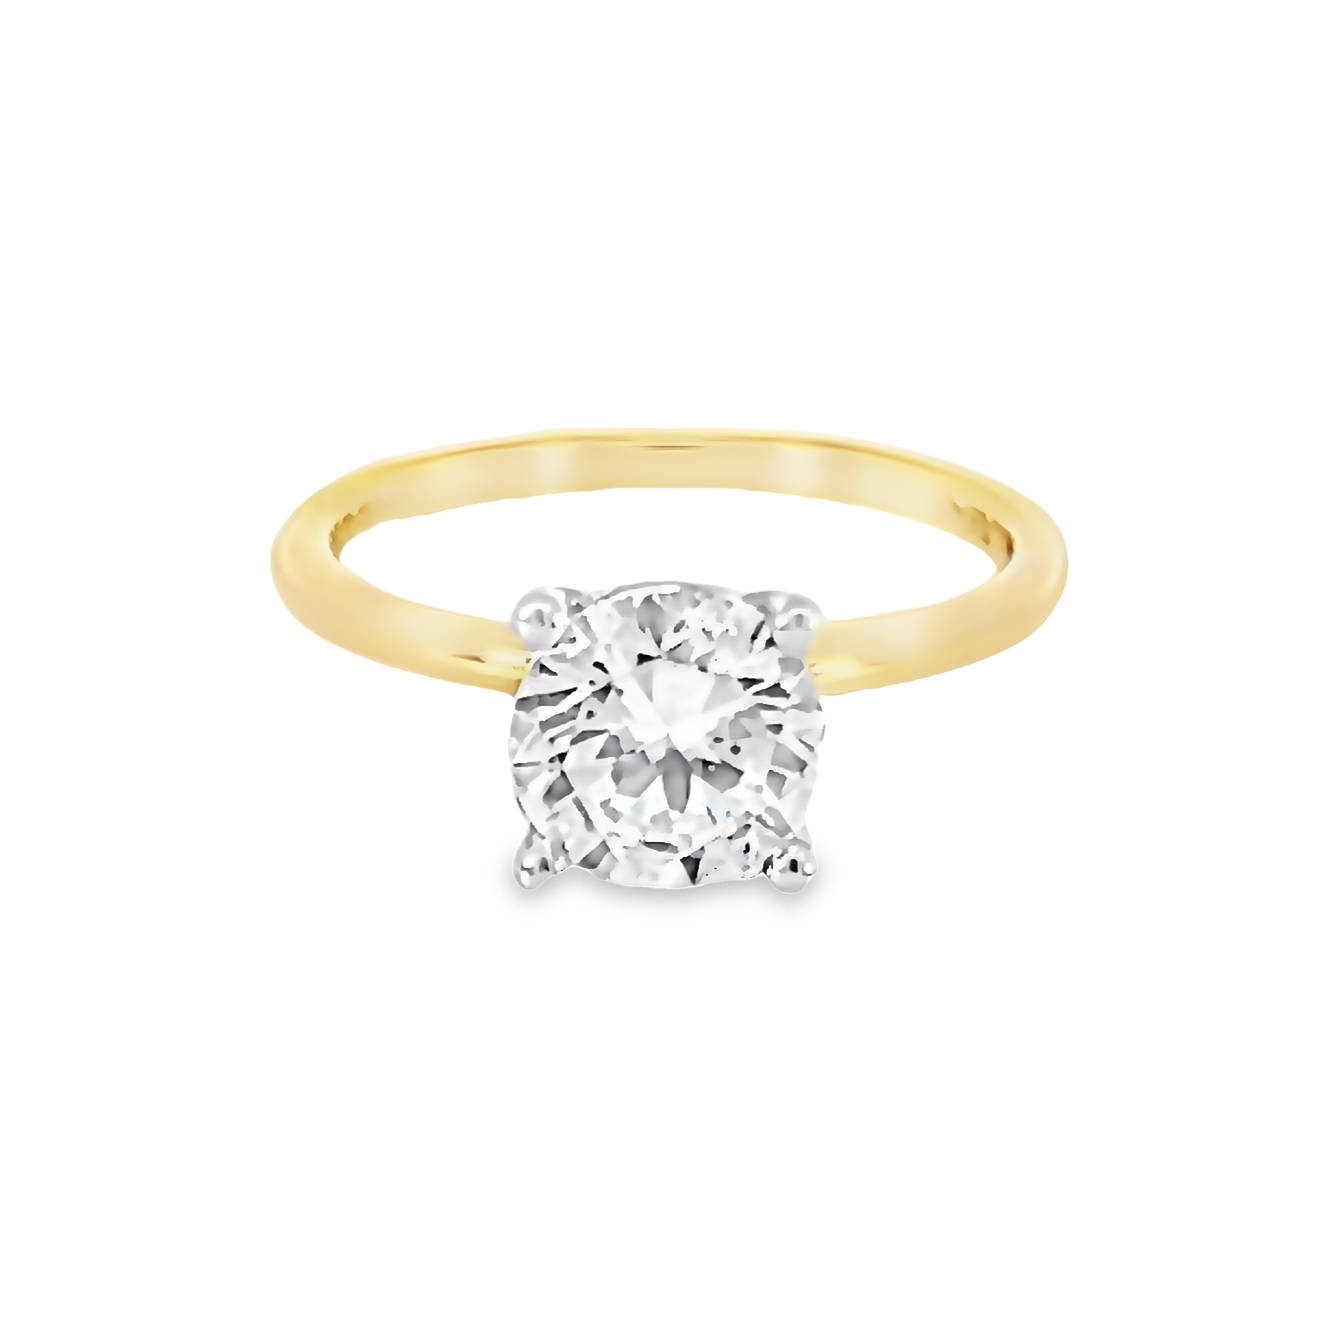 14 Karat Yellow Gold Solitaire Semi Mount Engagement Ring With A 14 Karat White Gold Head. Size 6.5